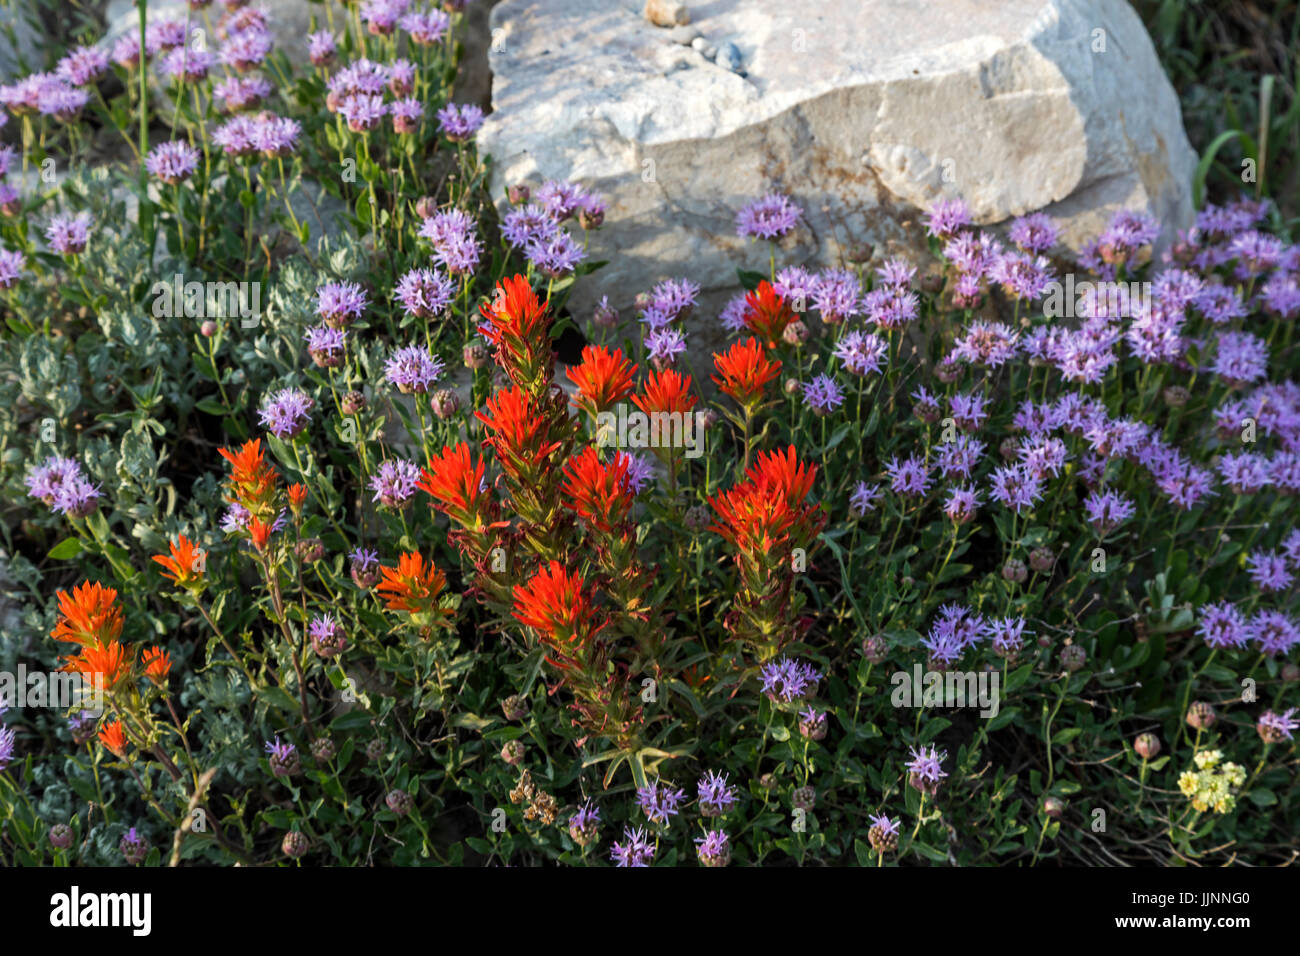 This is a view of a bright red Paintbrush wildflower (Castilleja chromosa) surrounded by Clover-headed mint (Monardella odoratissima). Stock Photo